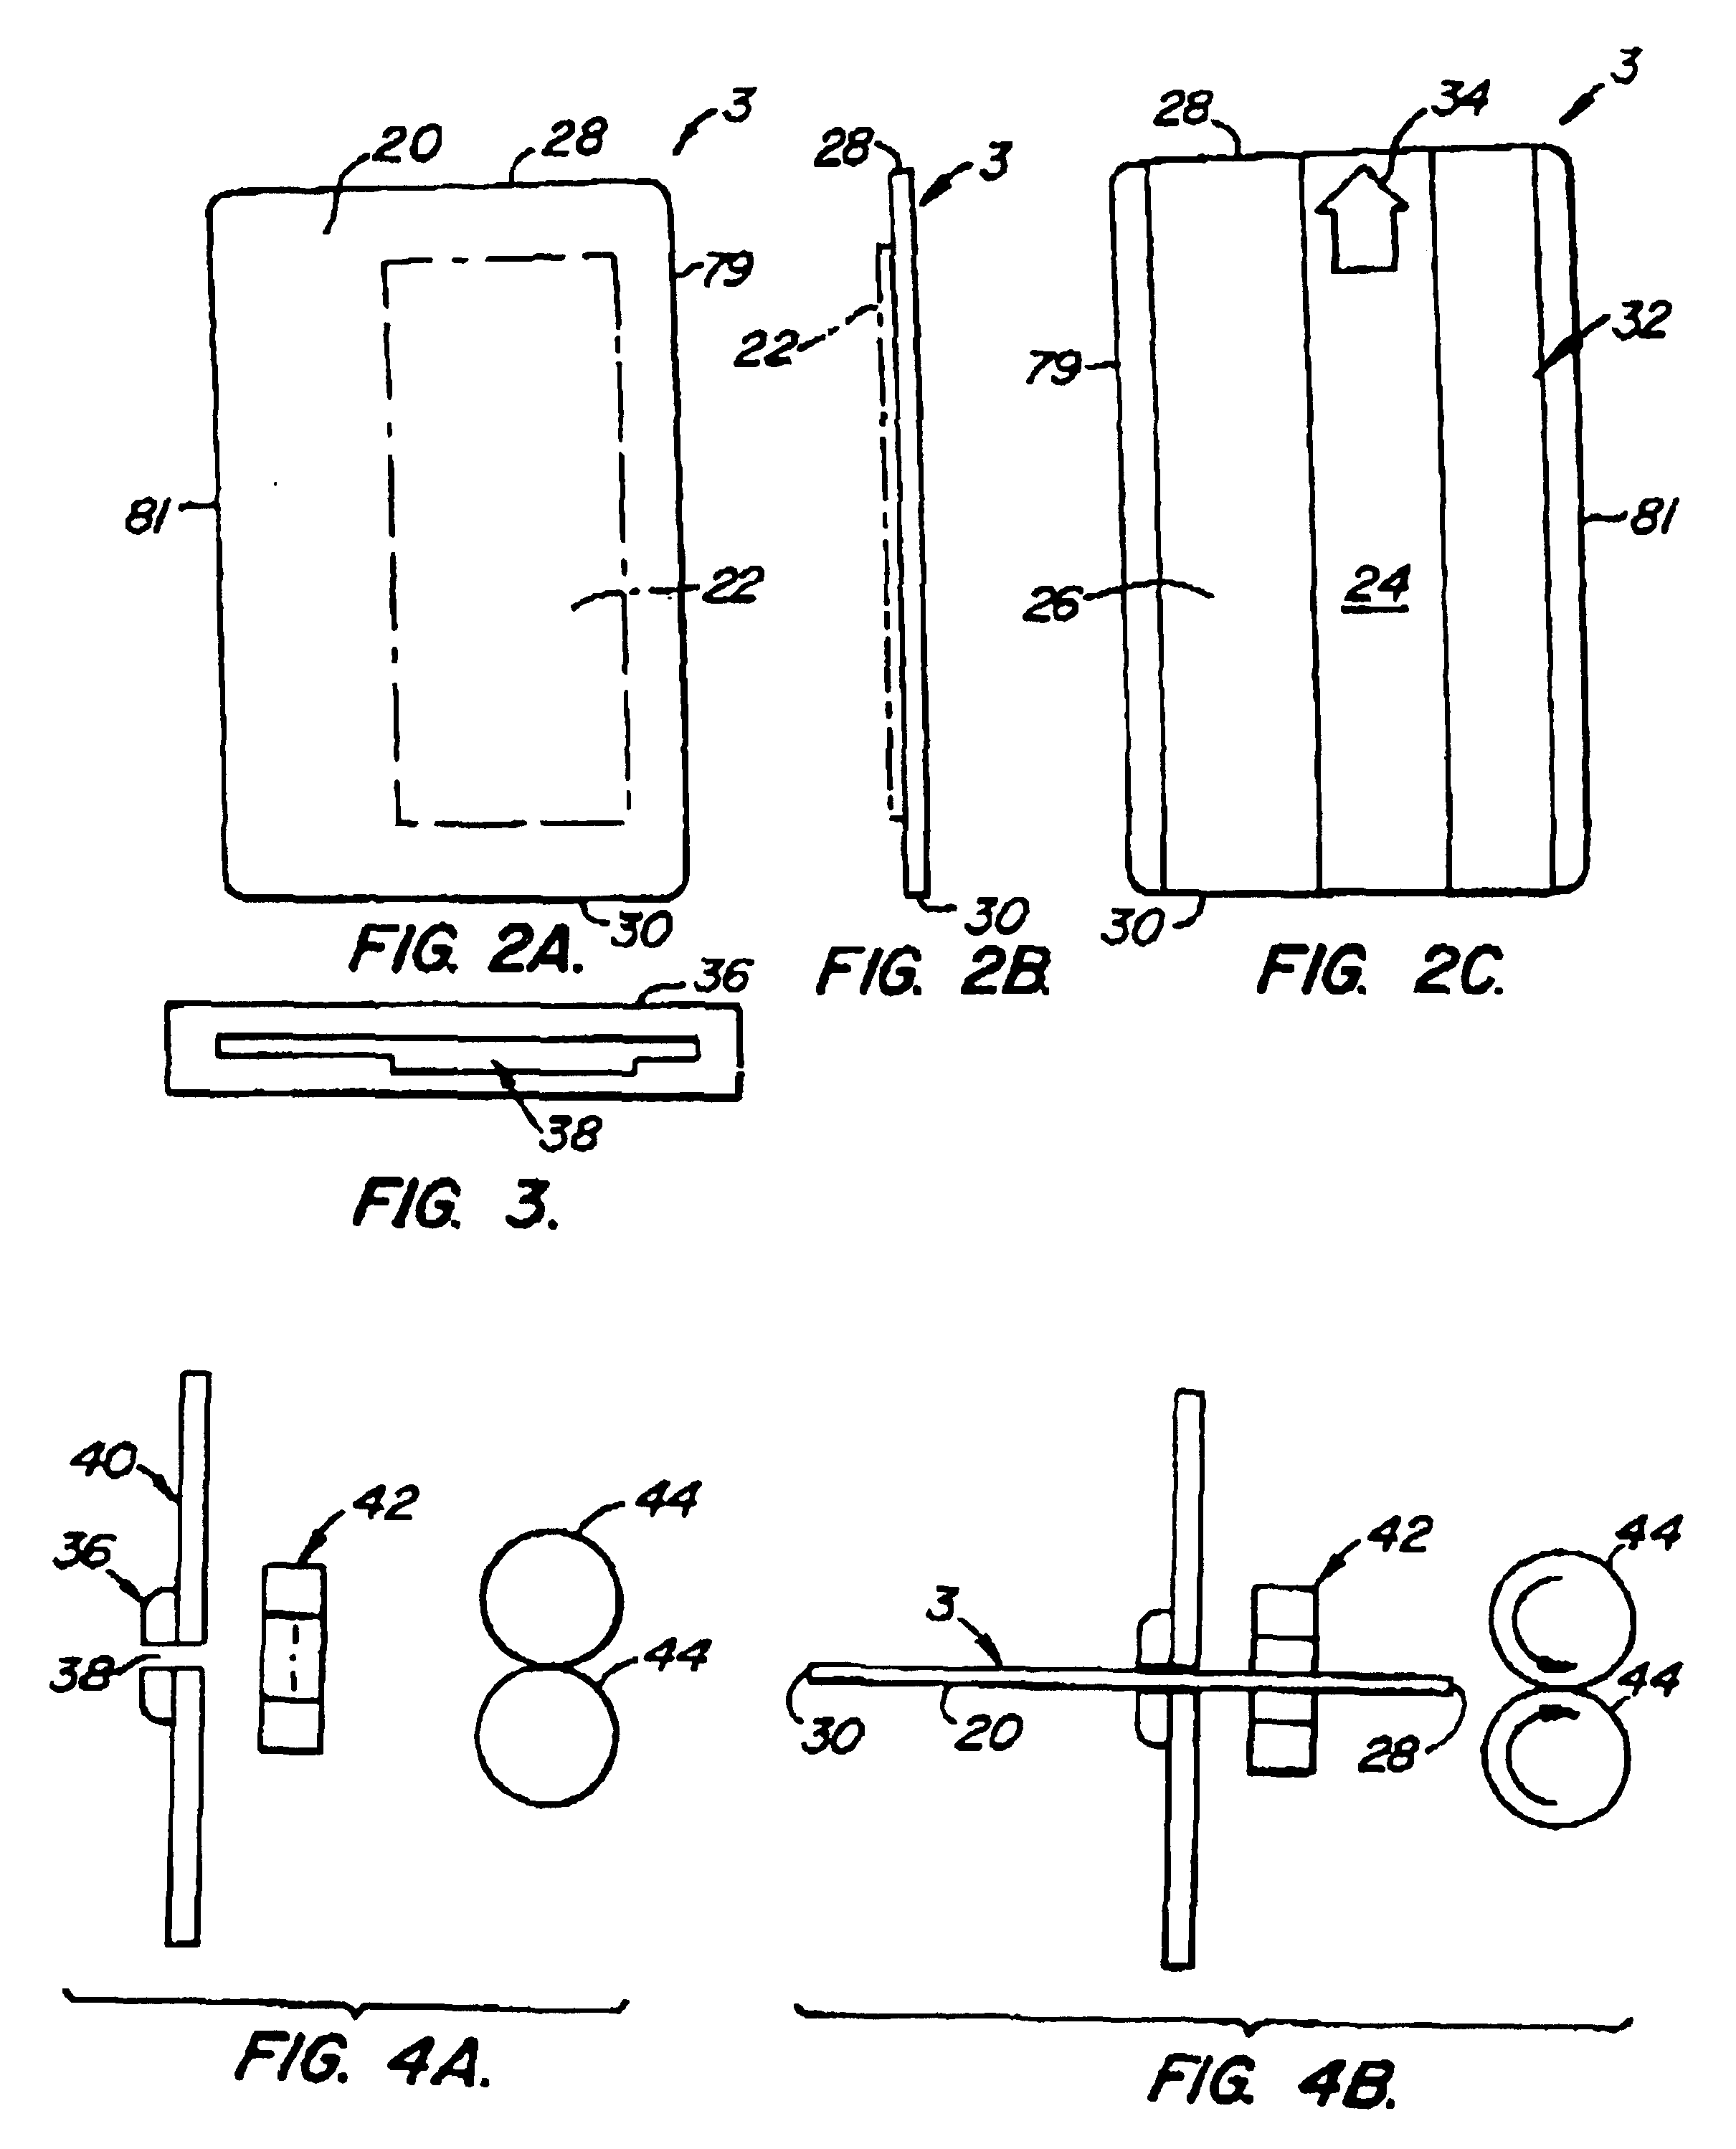 Data storage card having a non-magnetic substrate and data surface region and method for using same